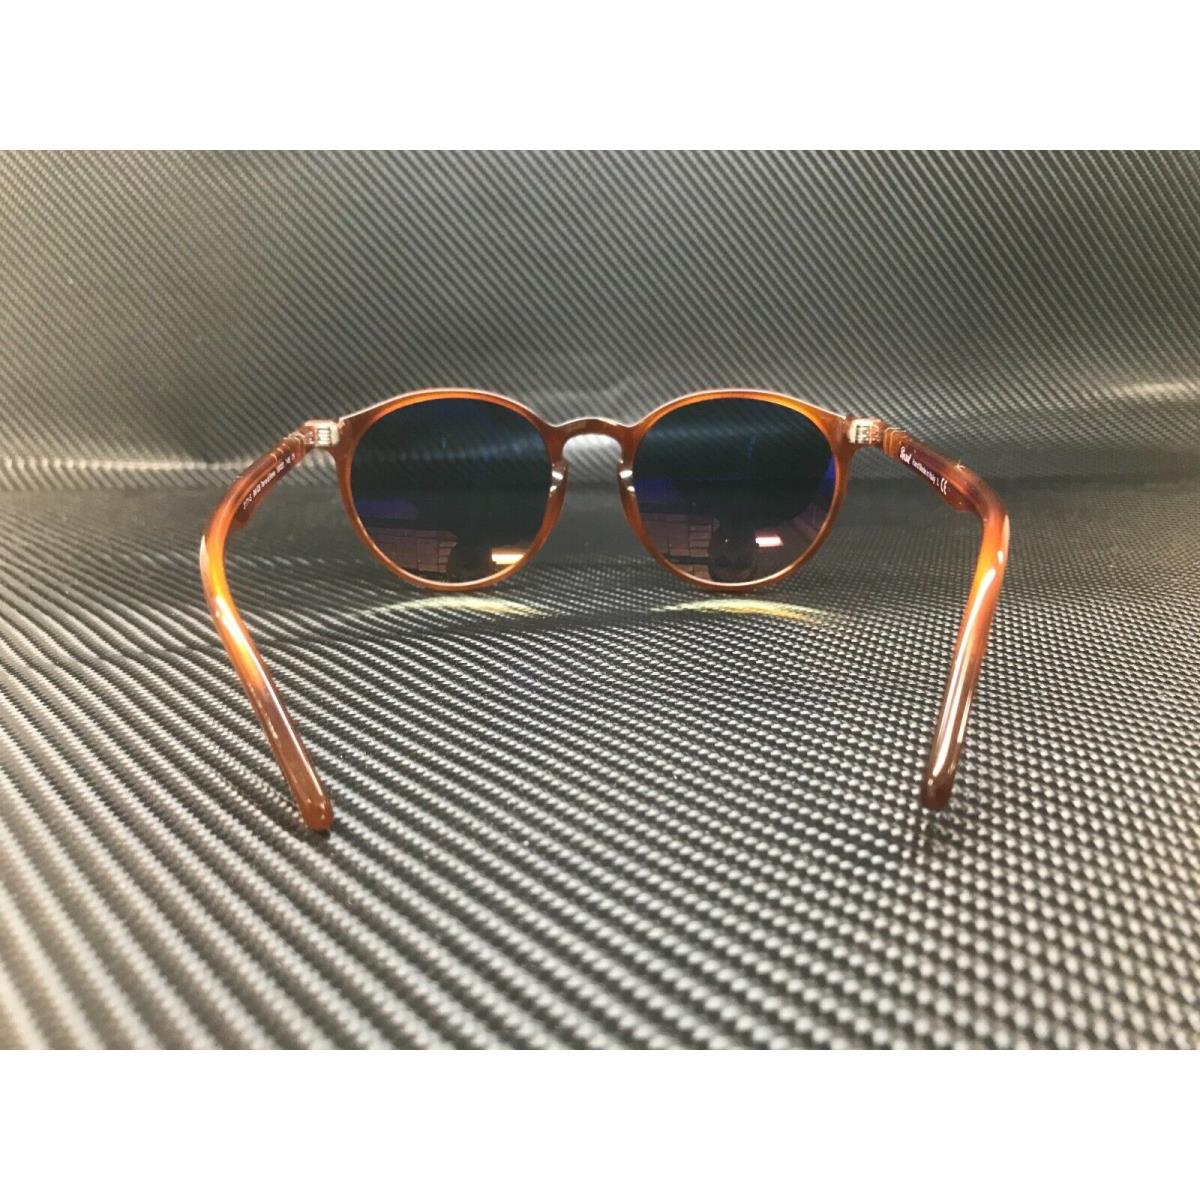 Persol sunglasses  - Brown Frame 2